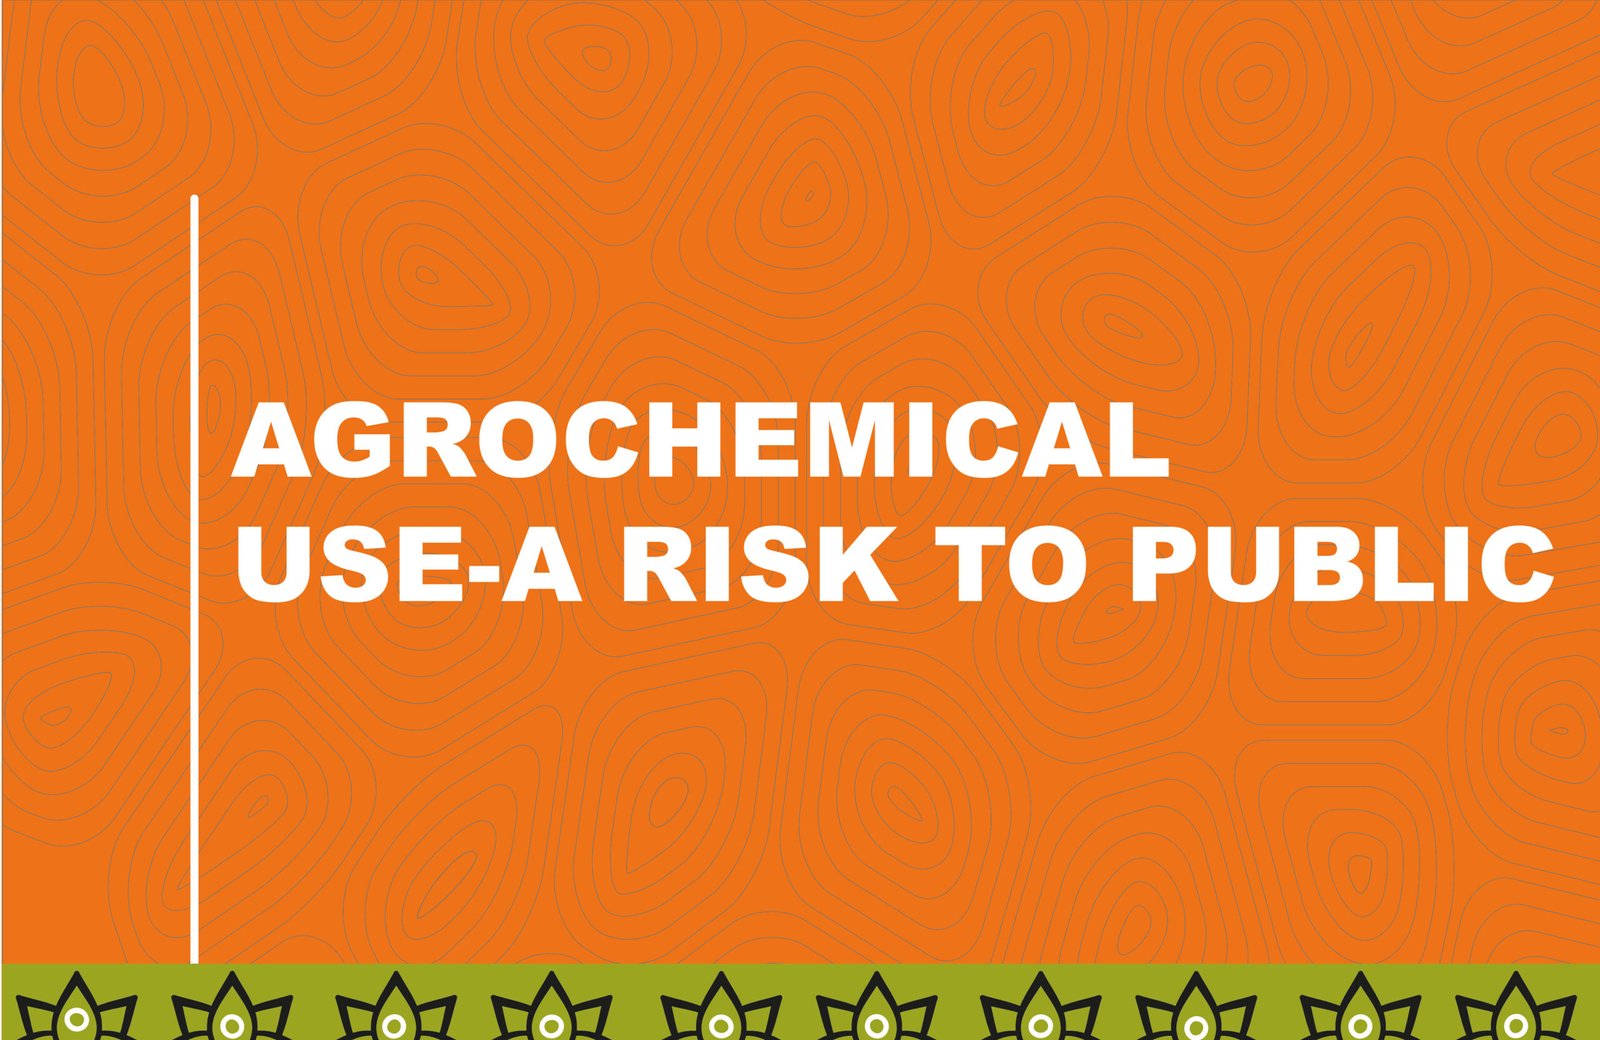 AGROCHEMICAL USE-A RISK TO PUBLIC HEALTH